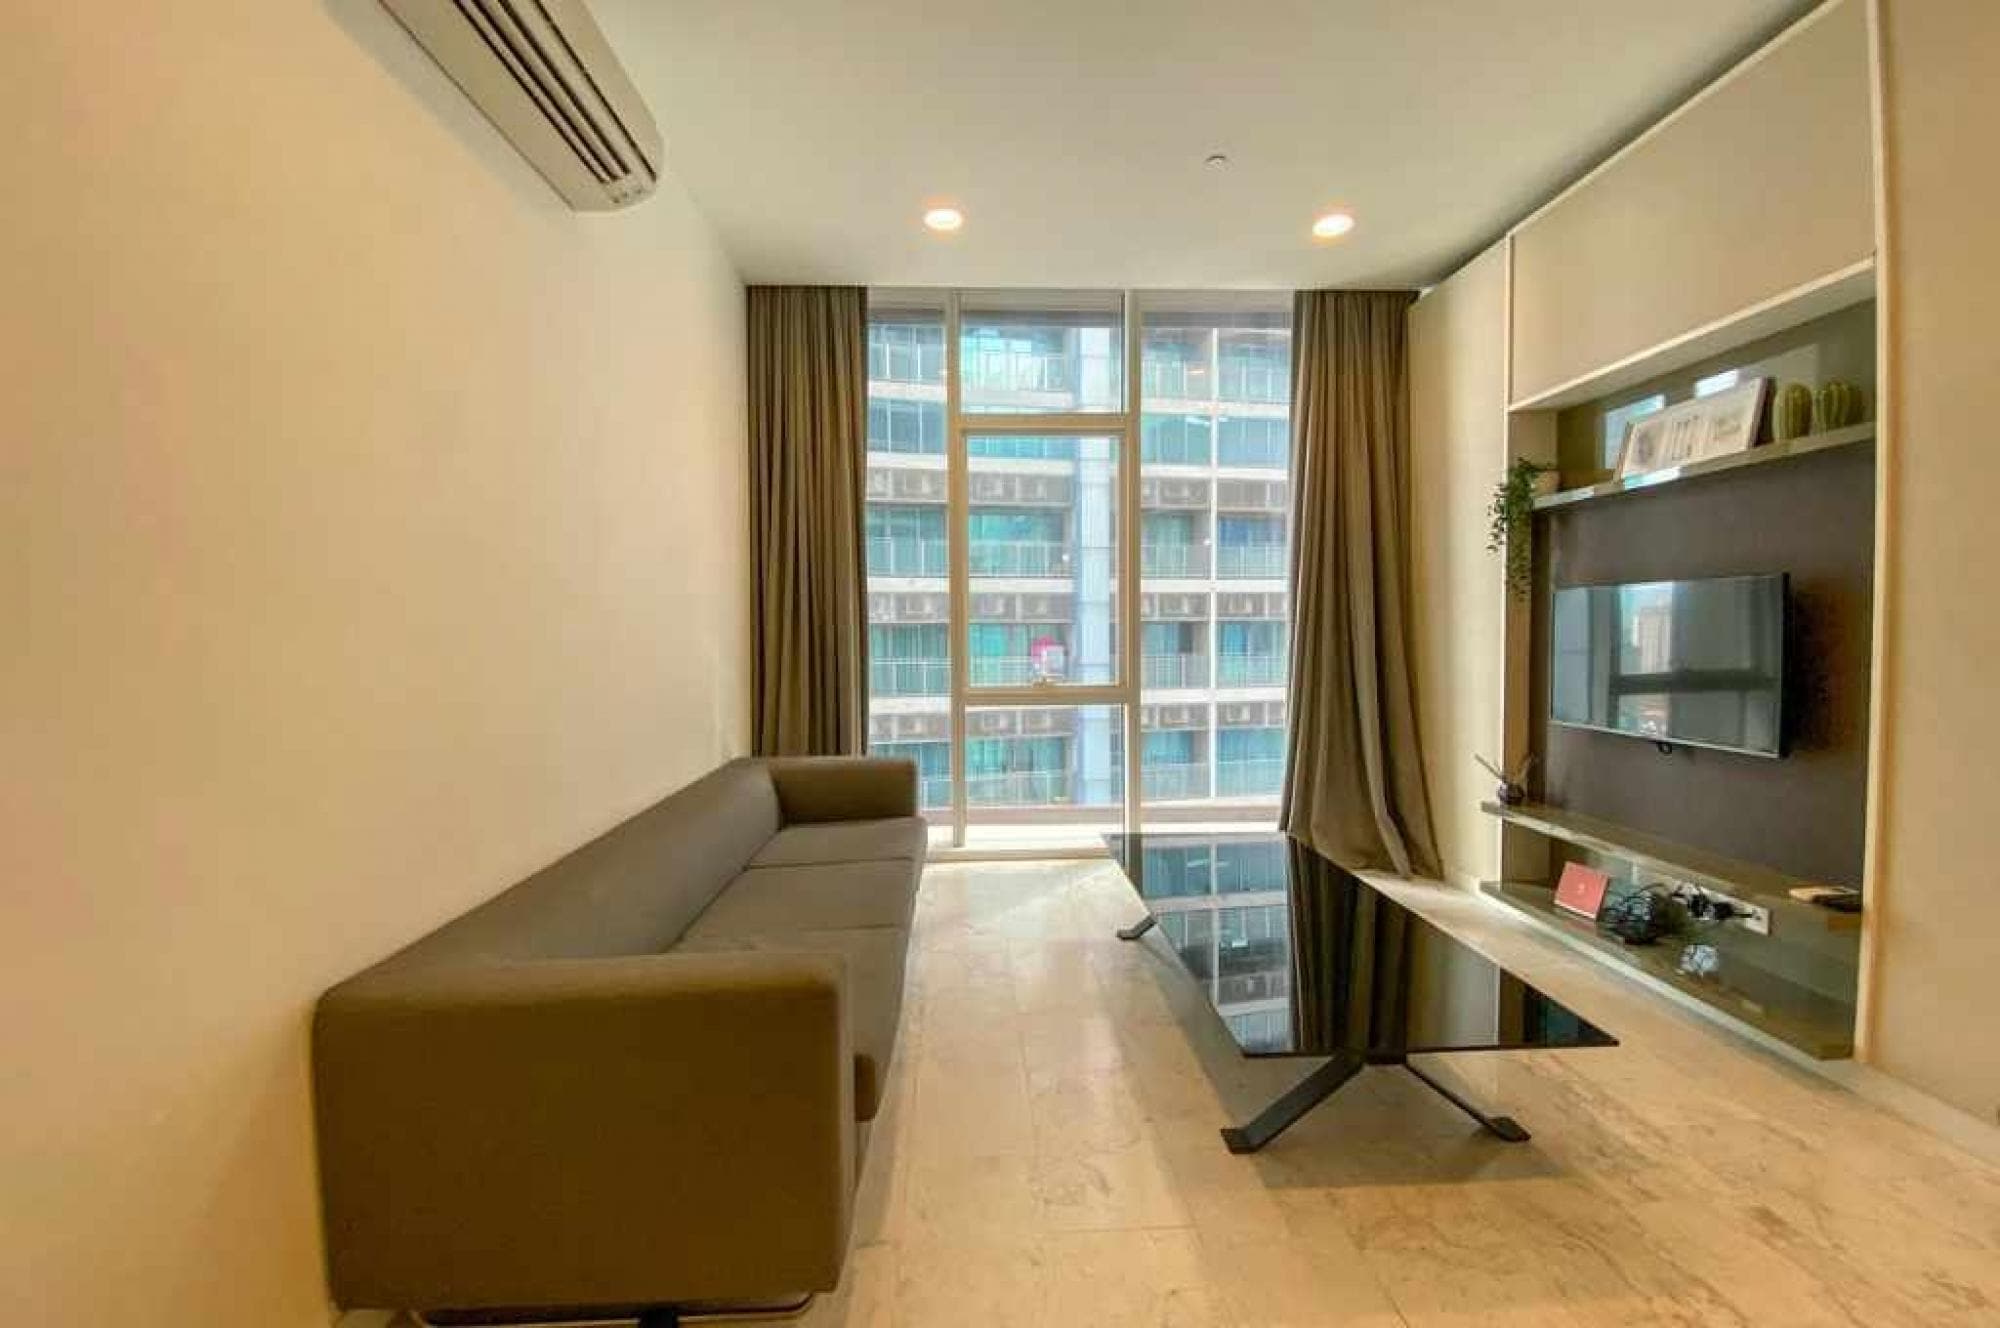 Property Image 1 - Quirky Cool Two Bedroom Apartment in the Center of Kuala Lumpur